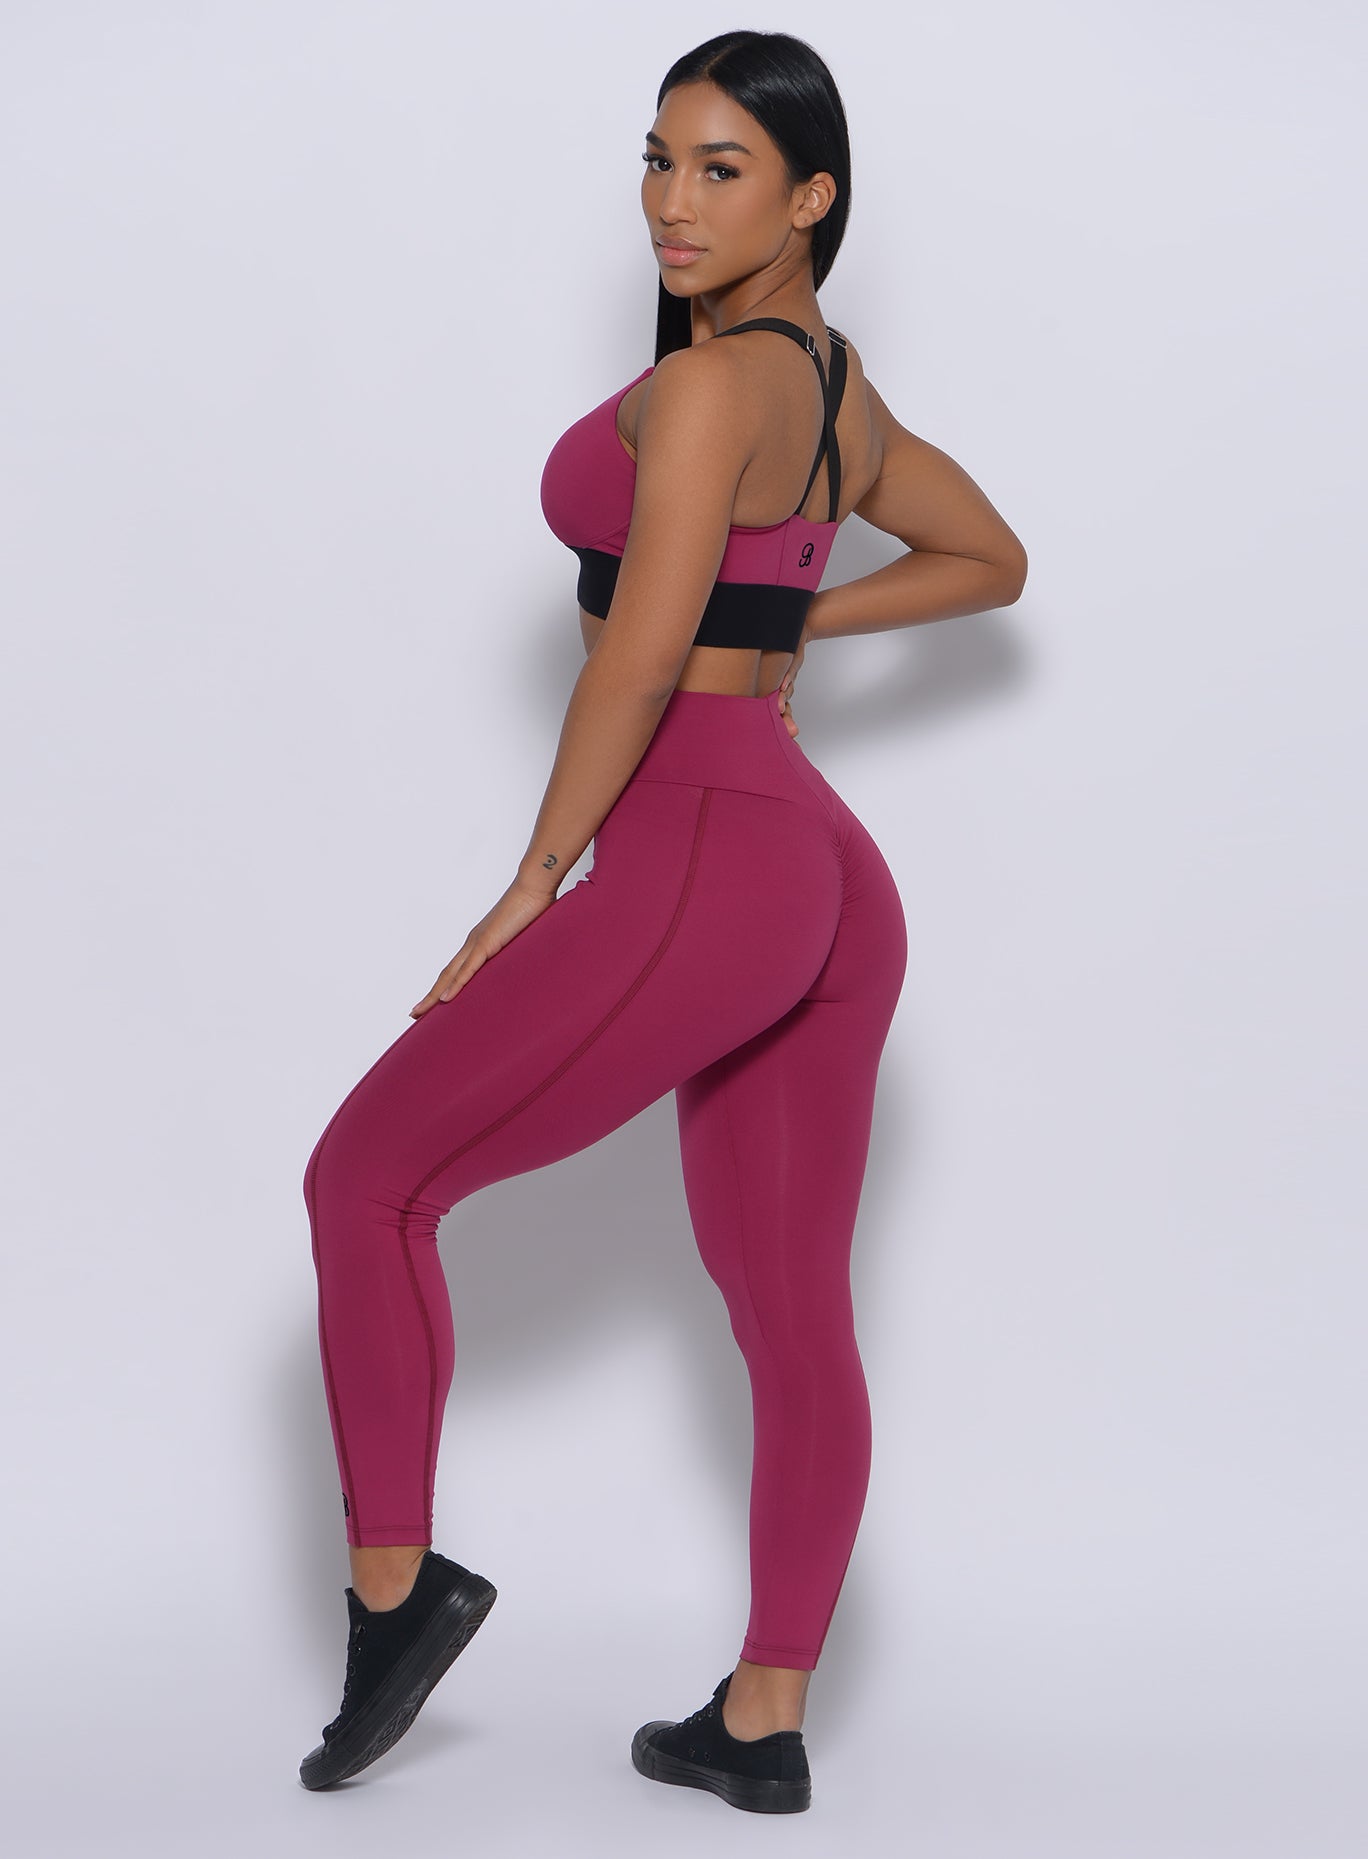 Left side  view of the model in our Brazilian leggings in mulberry color and a matching bra